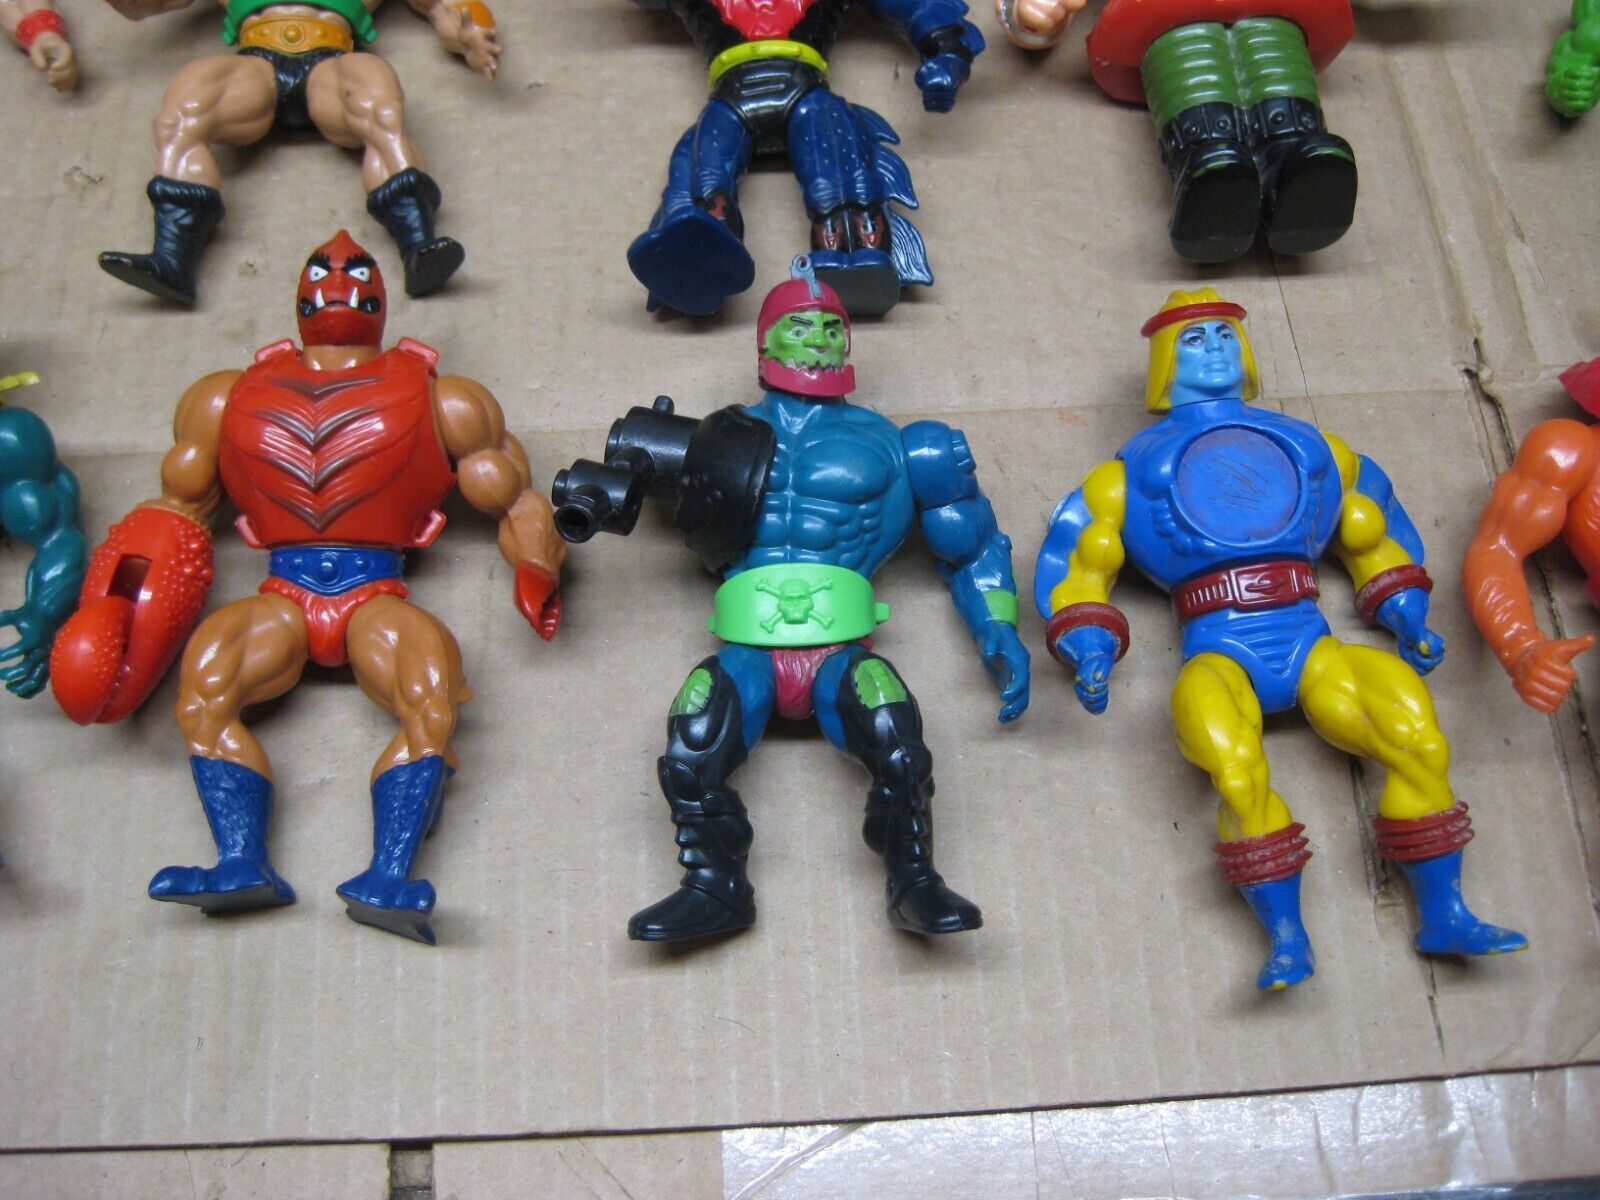 Vintage 1980's He-Man / Masters of the Universe Figurines - Various Characters